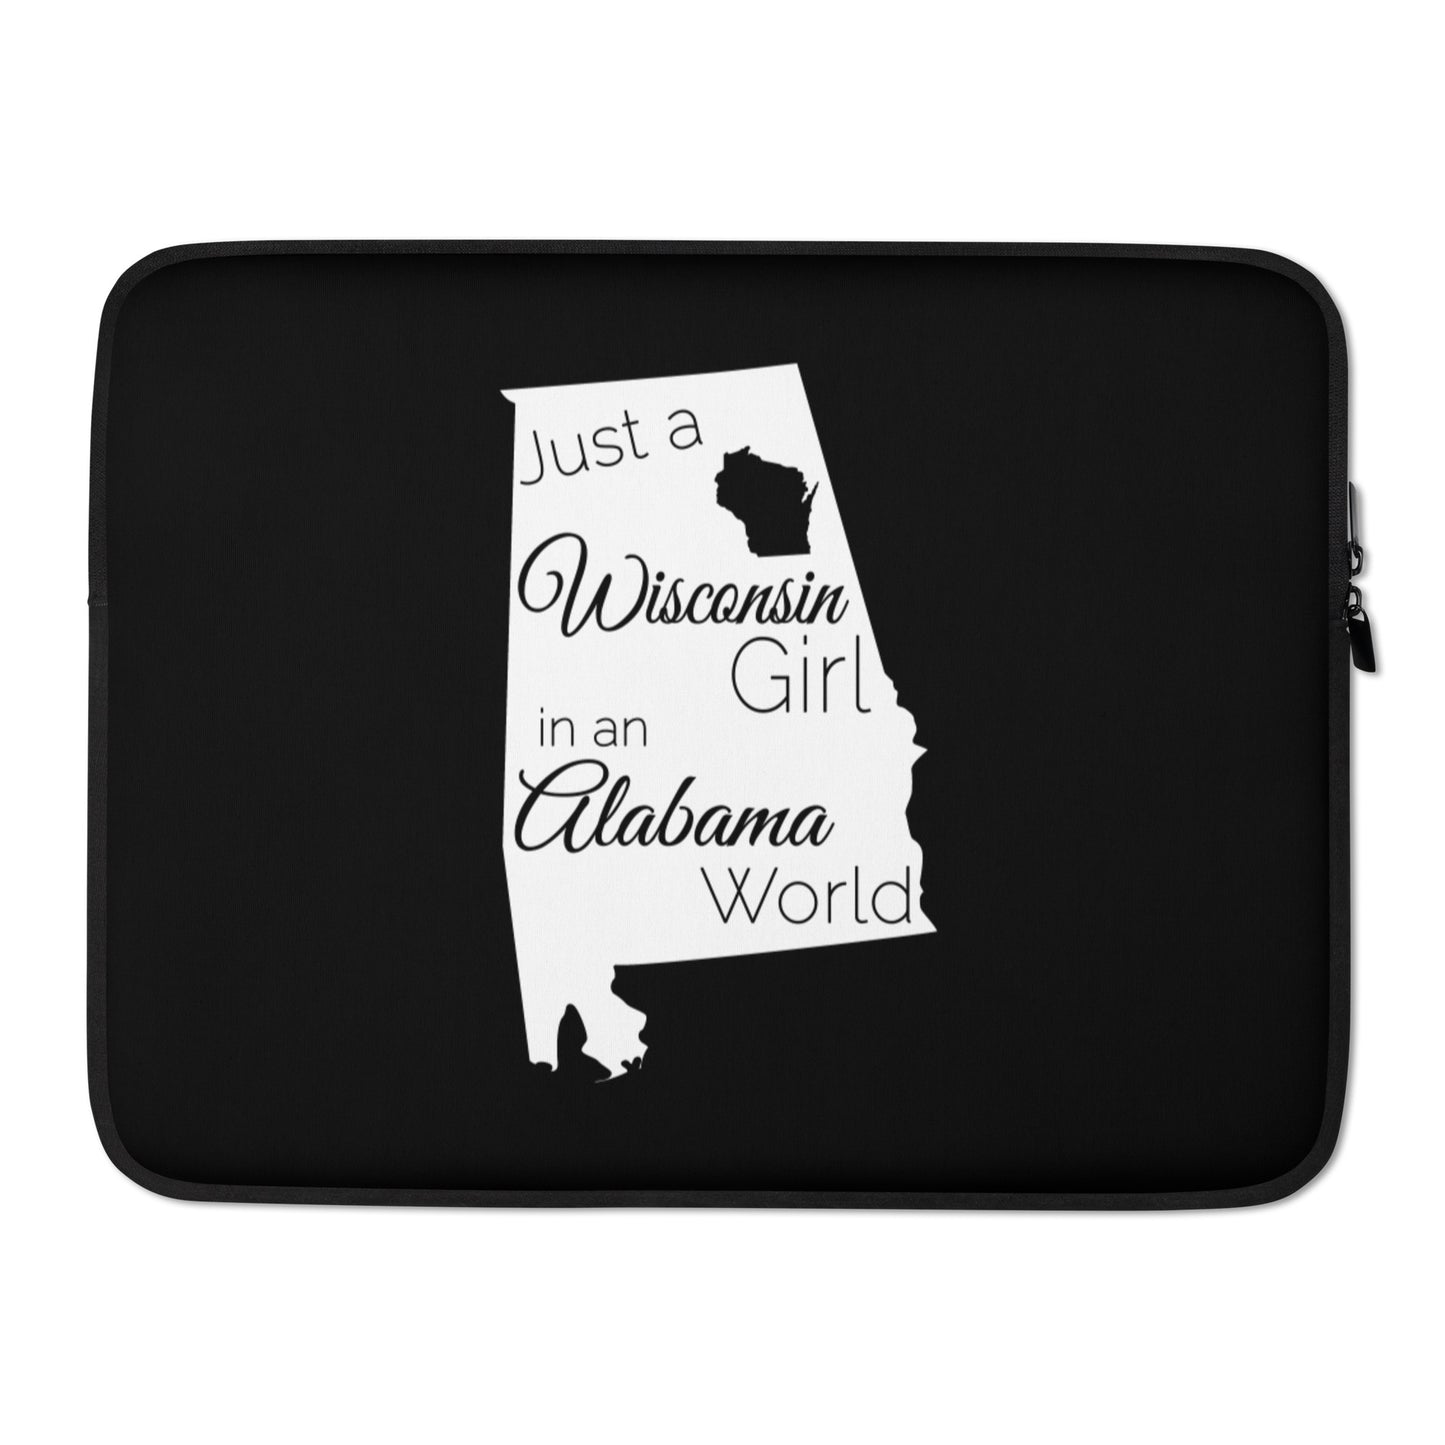 Just a Wisconsin Girl in an Alabama World Laptop Sleeve